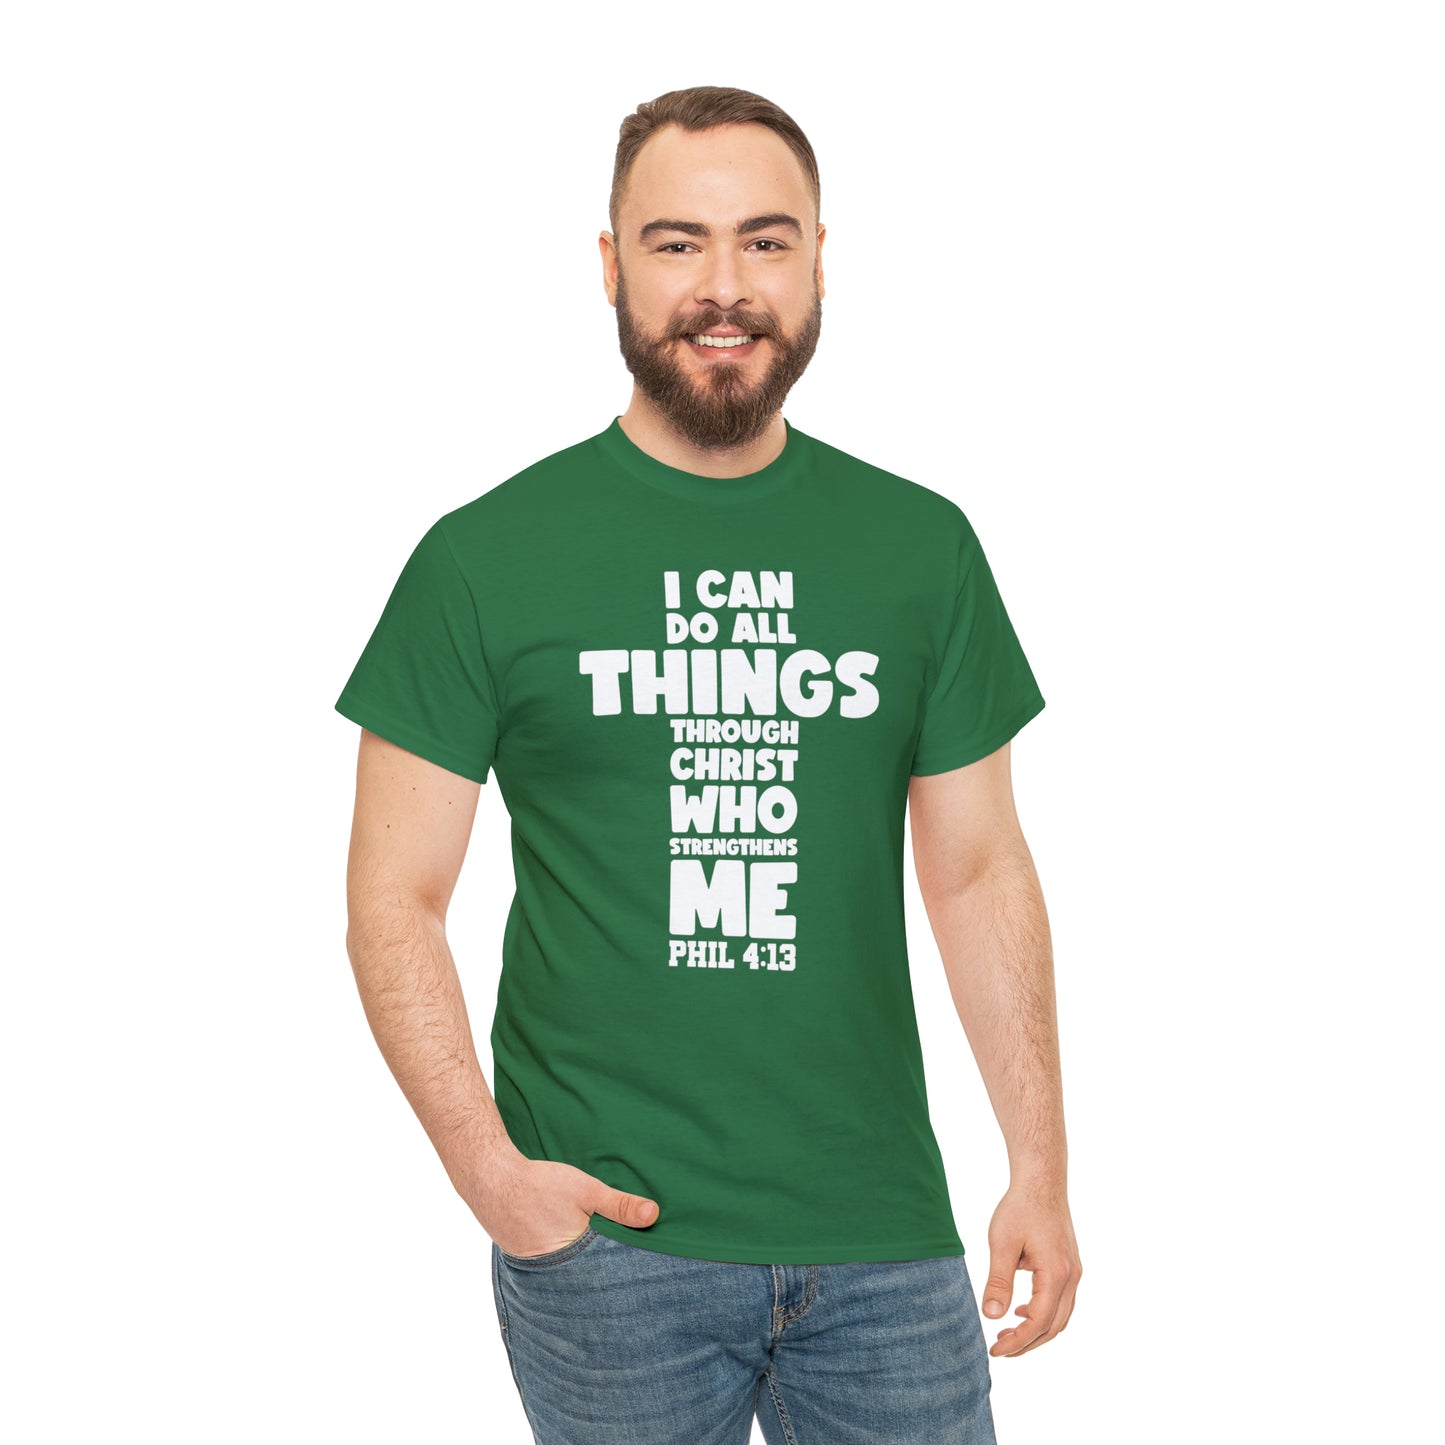 I CAN DO THINGS THROUGH CHRIST WHO STRENGTHENS ME - DRK TEE